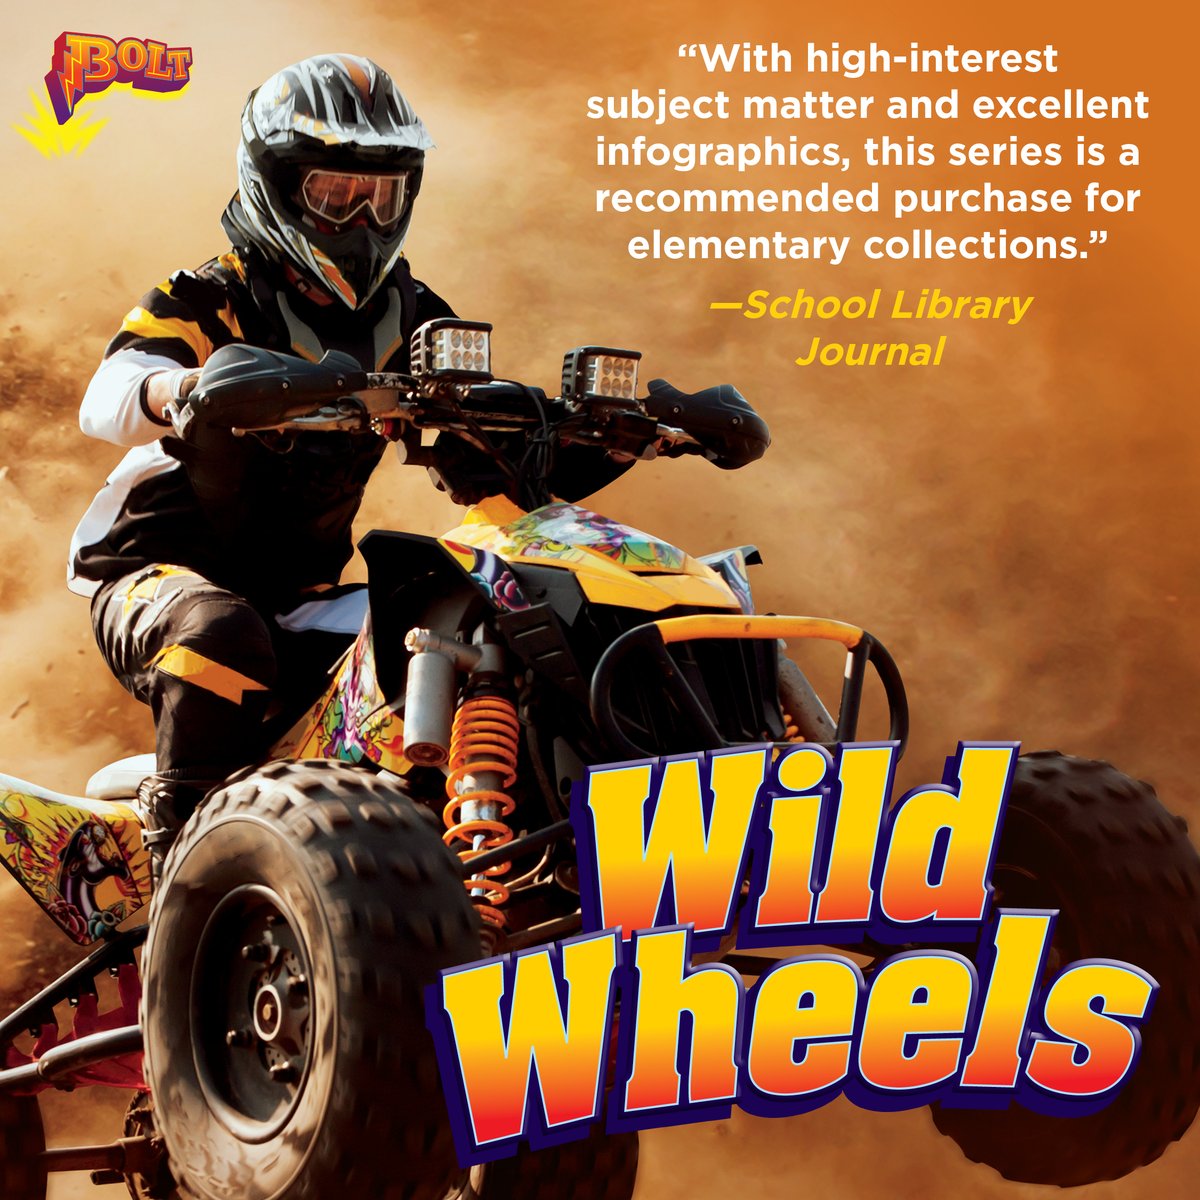 Engage struggling and reluctant readers with a topic they love! @sljournal

Wild Wheels blackrabbitbooks.com/collections/wi…

#bookreview #highinterestbooks #vehicles #transportation #BlackRabbitBooks